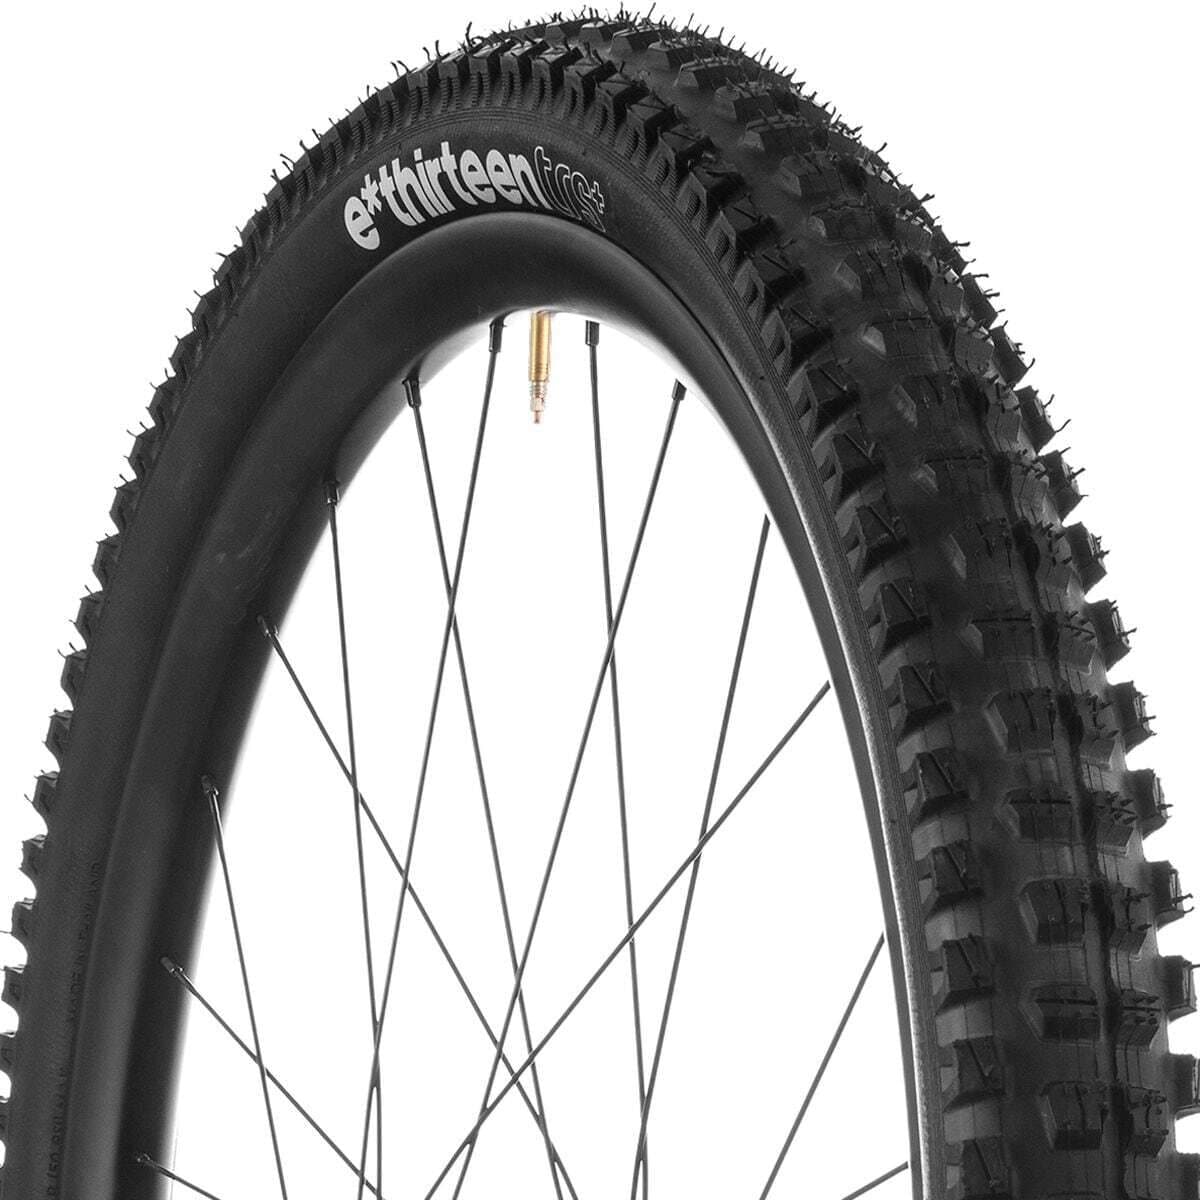 e*thirteen components TRS Plus All-Terrain Gen 3 27.5in Tire - No Packaging Black, Plus Compound, 27.5x2.4in